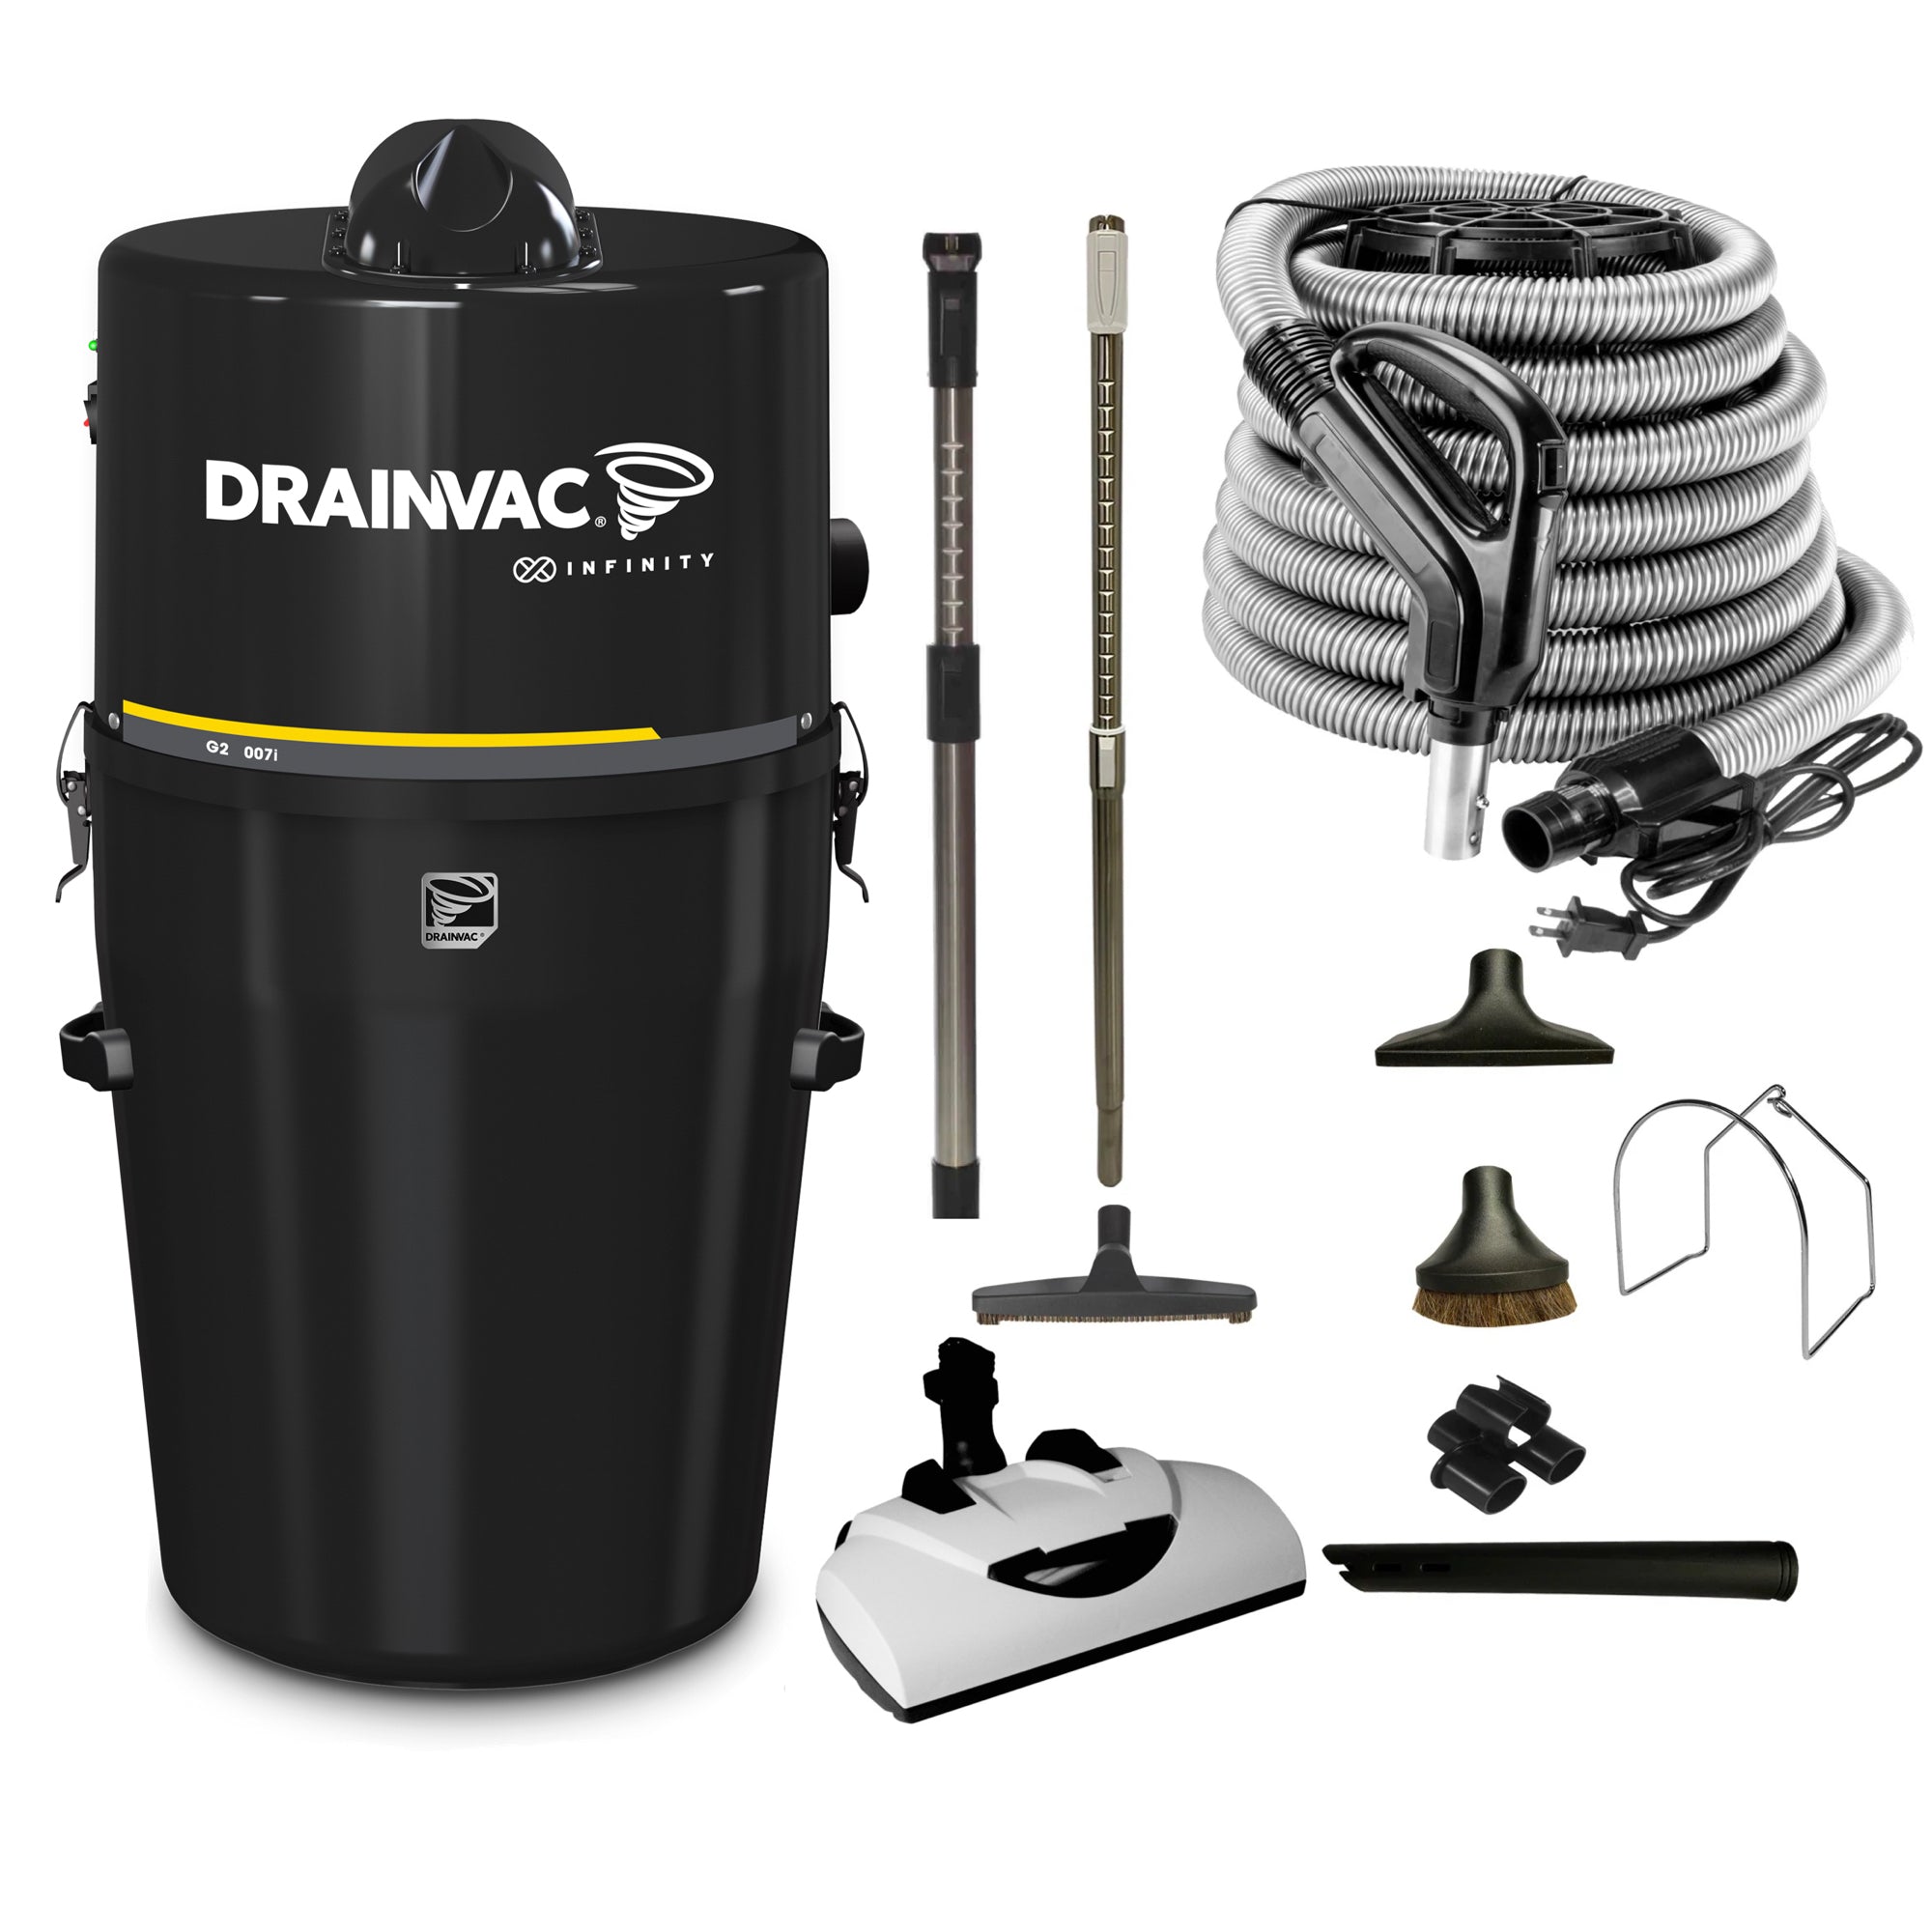 DrainVac G2-007i Infinity Central Vacuum with Wessel Werk EBK360 Electric Package